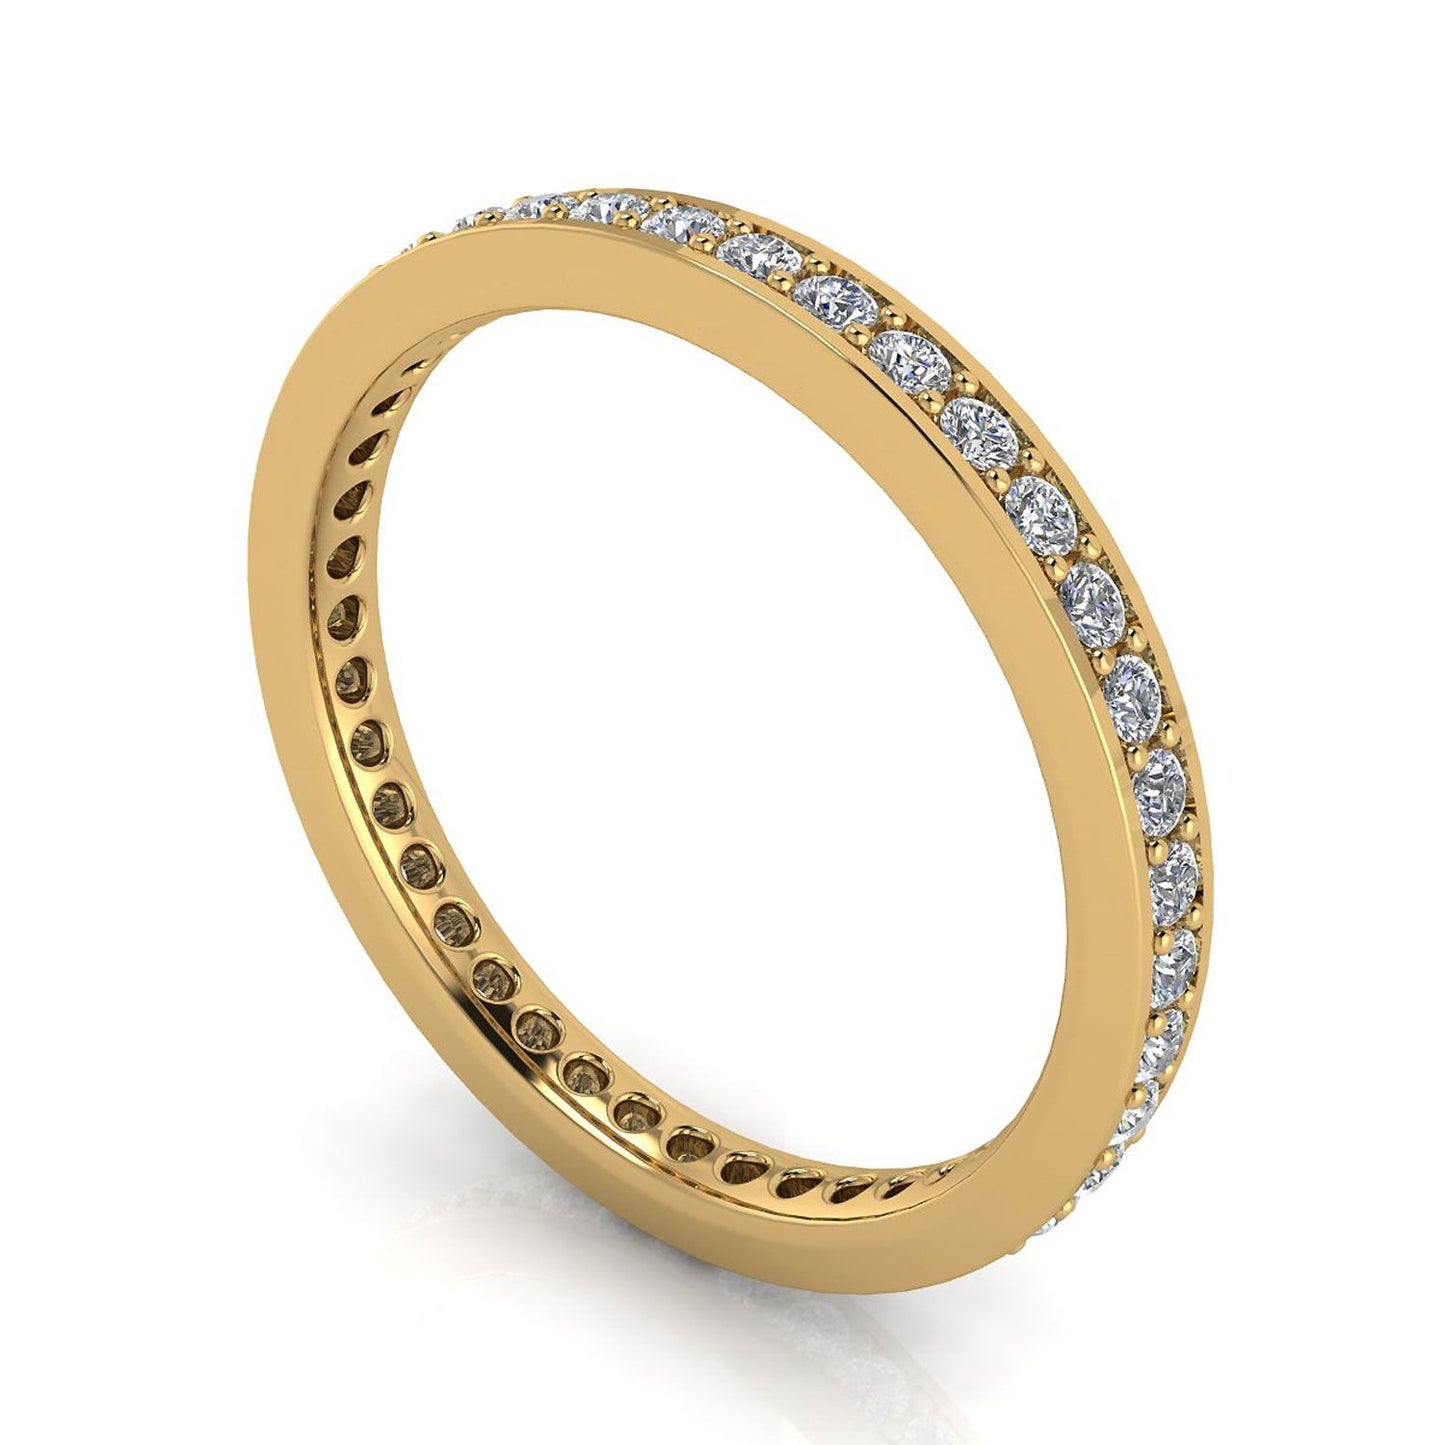 Round Brilliant Cut Diamond Channel Pave Set Eternity Ring In 18k Yellow Gold  (0.33ct. Tw.) Ring Size 7.5